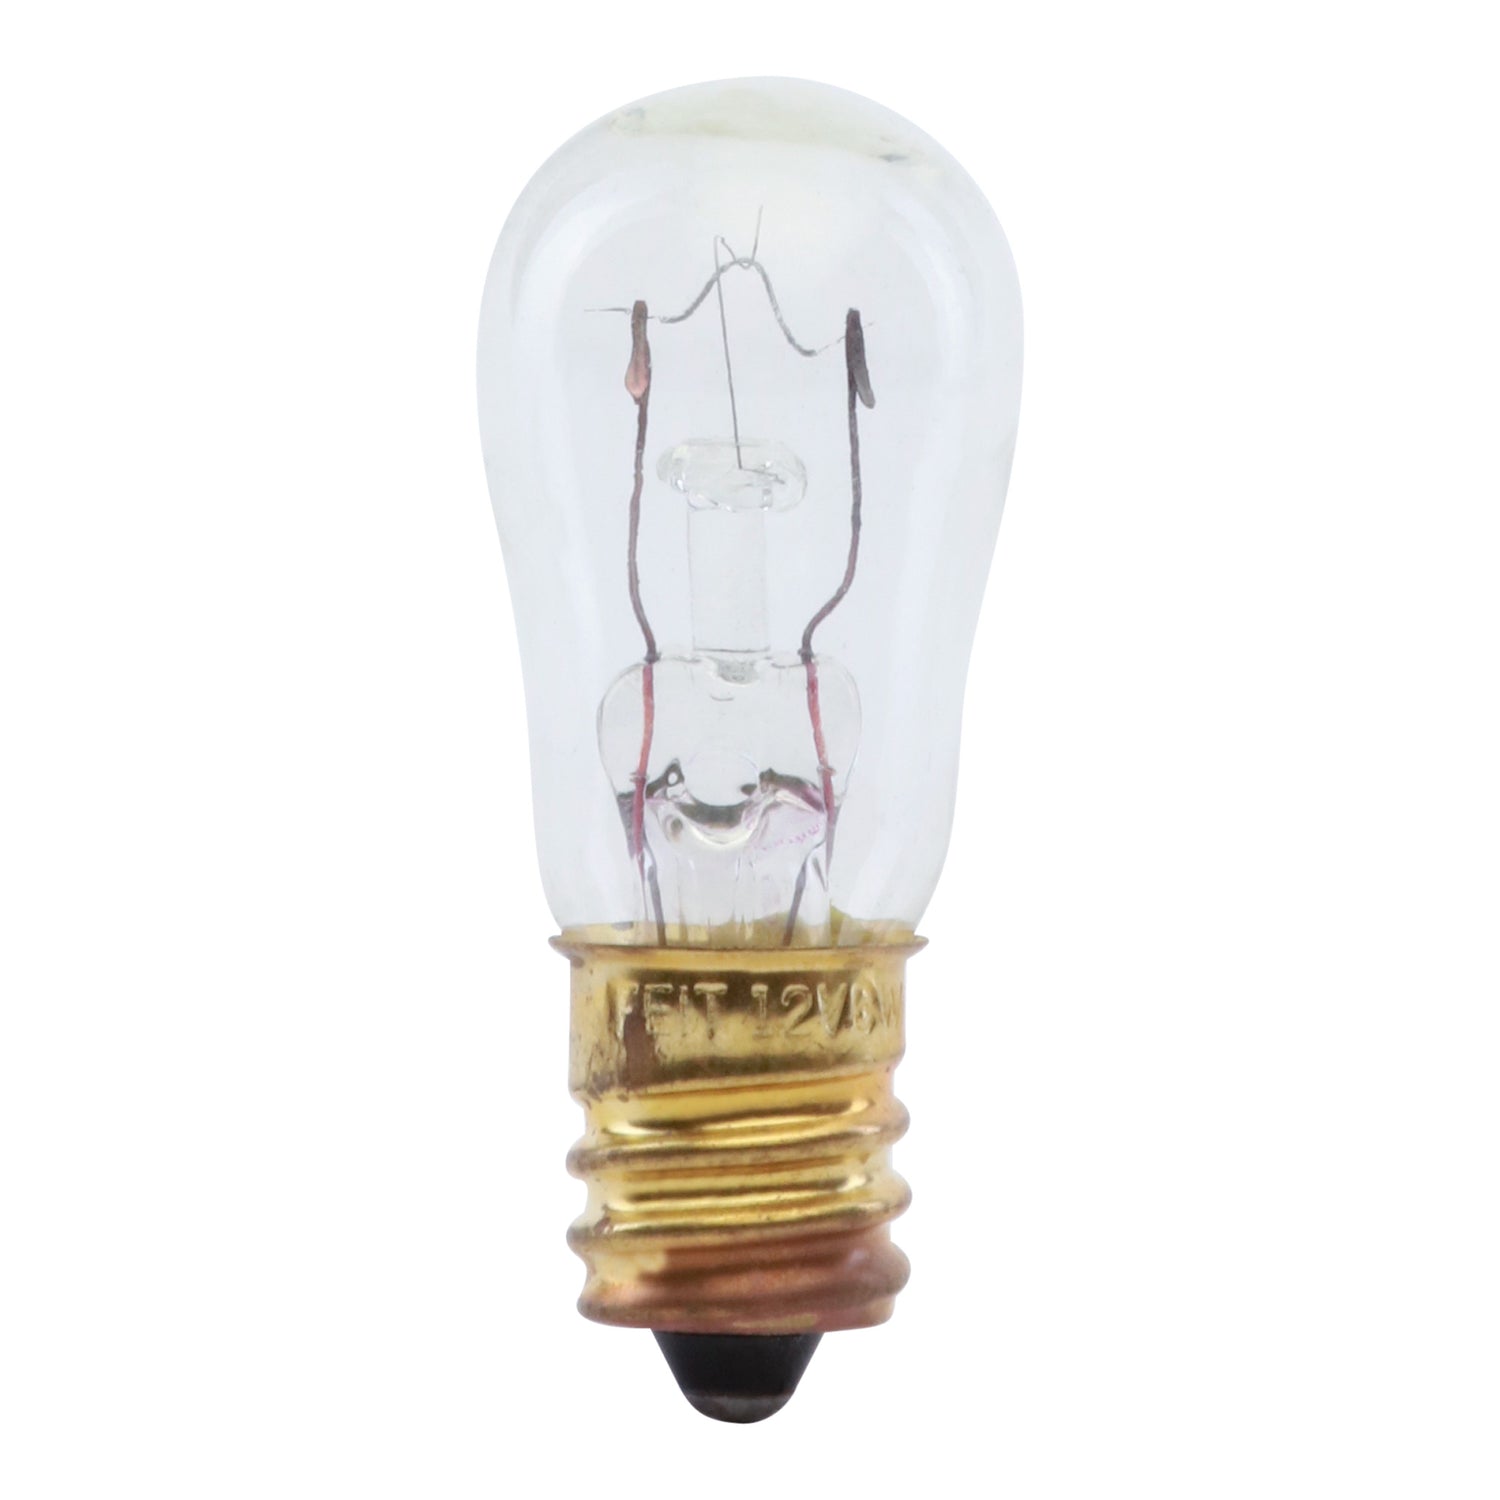 6W Soft White (2700K) S6 Candelabra E12 Base Dimmable Clear Appliance Incandescent Light Bulb (2-Pack)